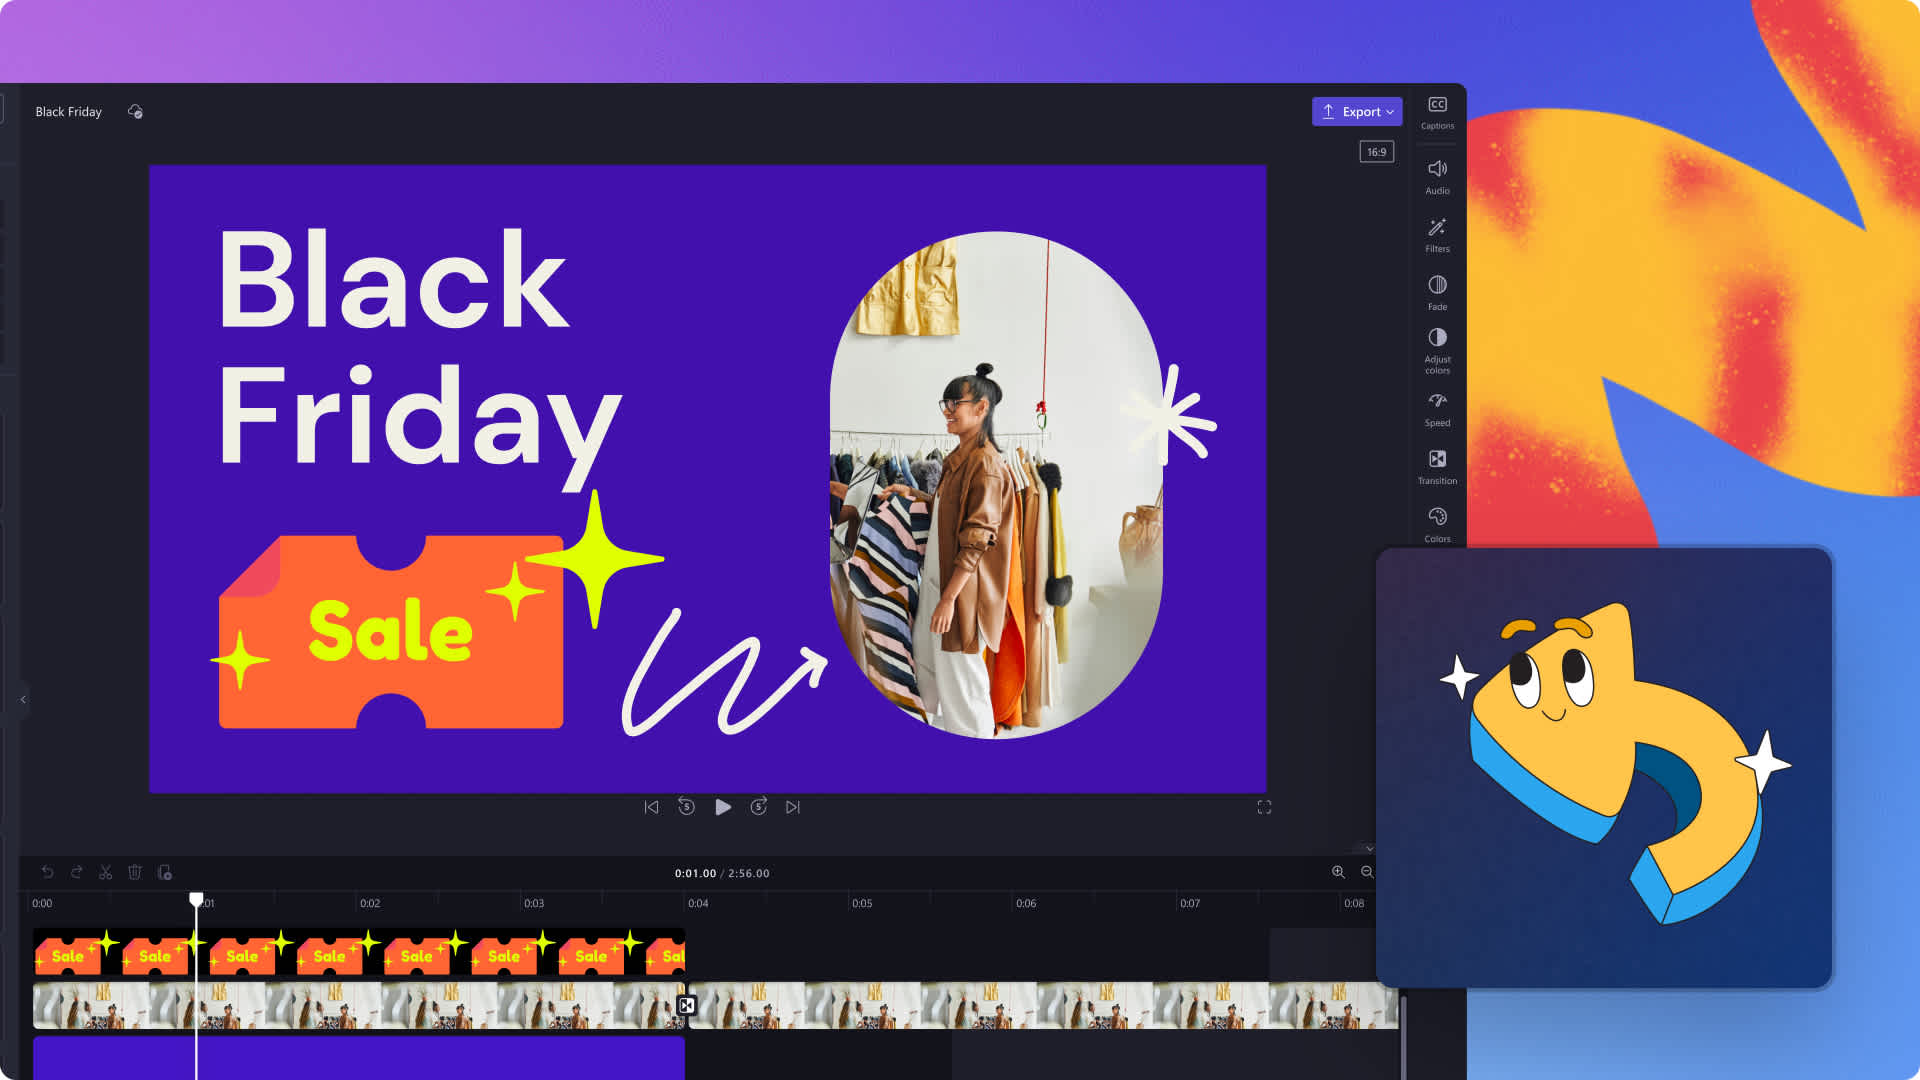 10 video templates for Black Friday sales and marketing